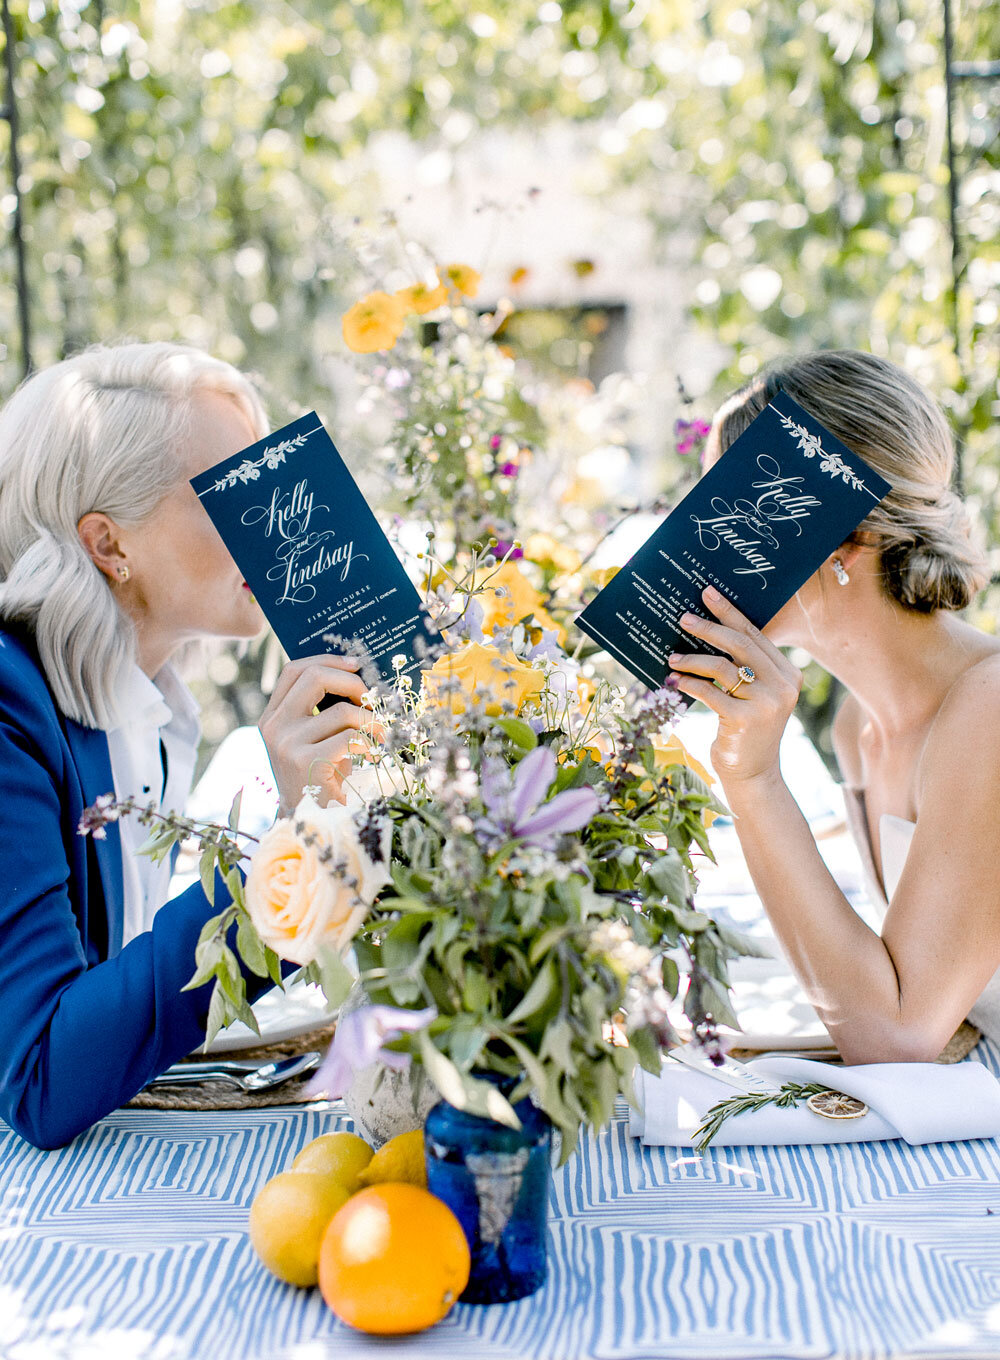 Two brides reading their wedding invitations at an outdoor table adorned with yellow, purple, and white flower arrangements and a blue patterned runner, captured by Joel Catering, New Orleans' LGBTQ-friendly event specialist